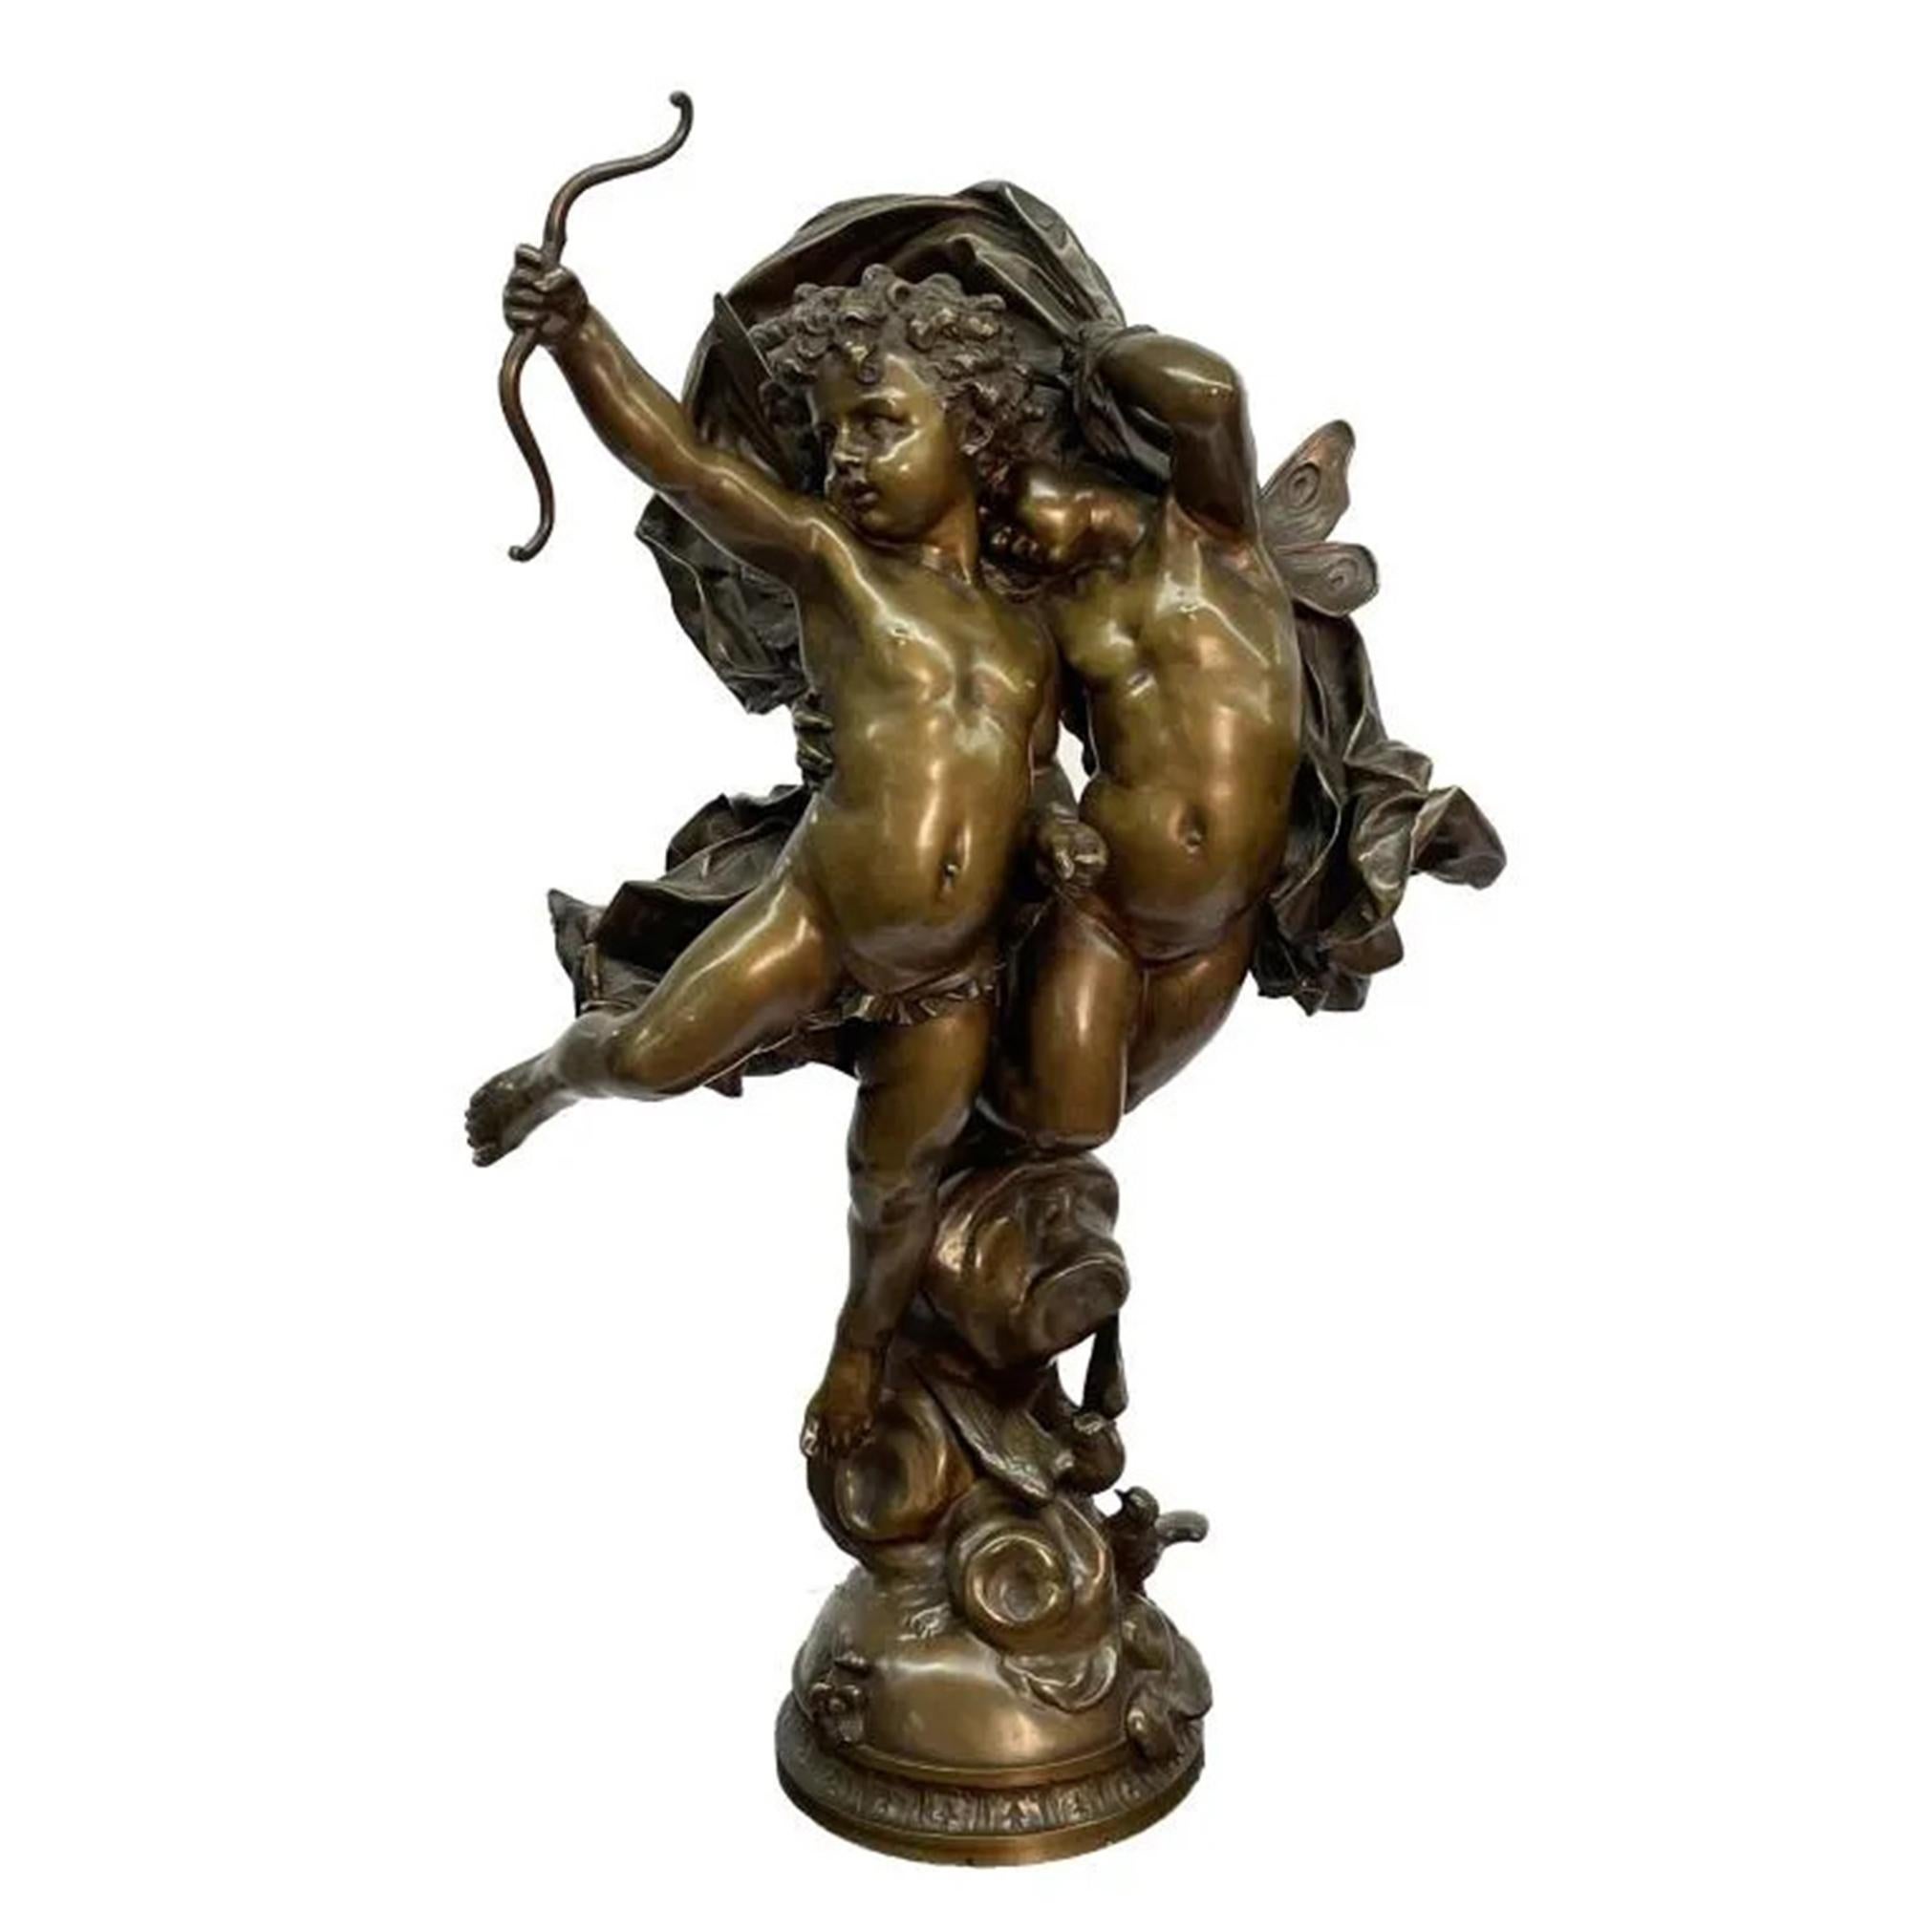 An Exquisite bronze figural pairing of two putti with butterfly wings. One putti holds a bow, while his counterpart cowers behind him. A dynamic piece of fabric hovers over the grouping, showcasing expertly modeled drapery, embellishing the